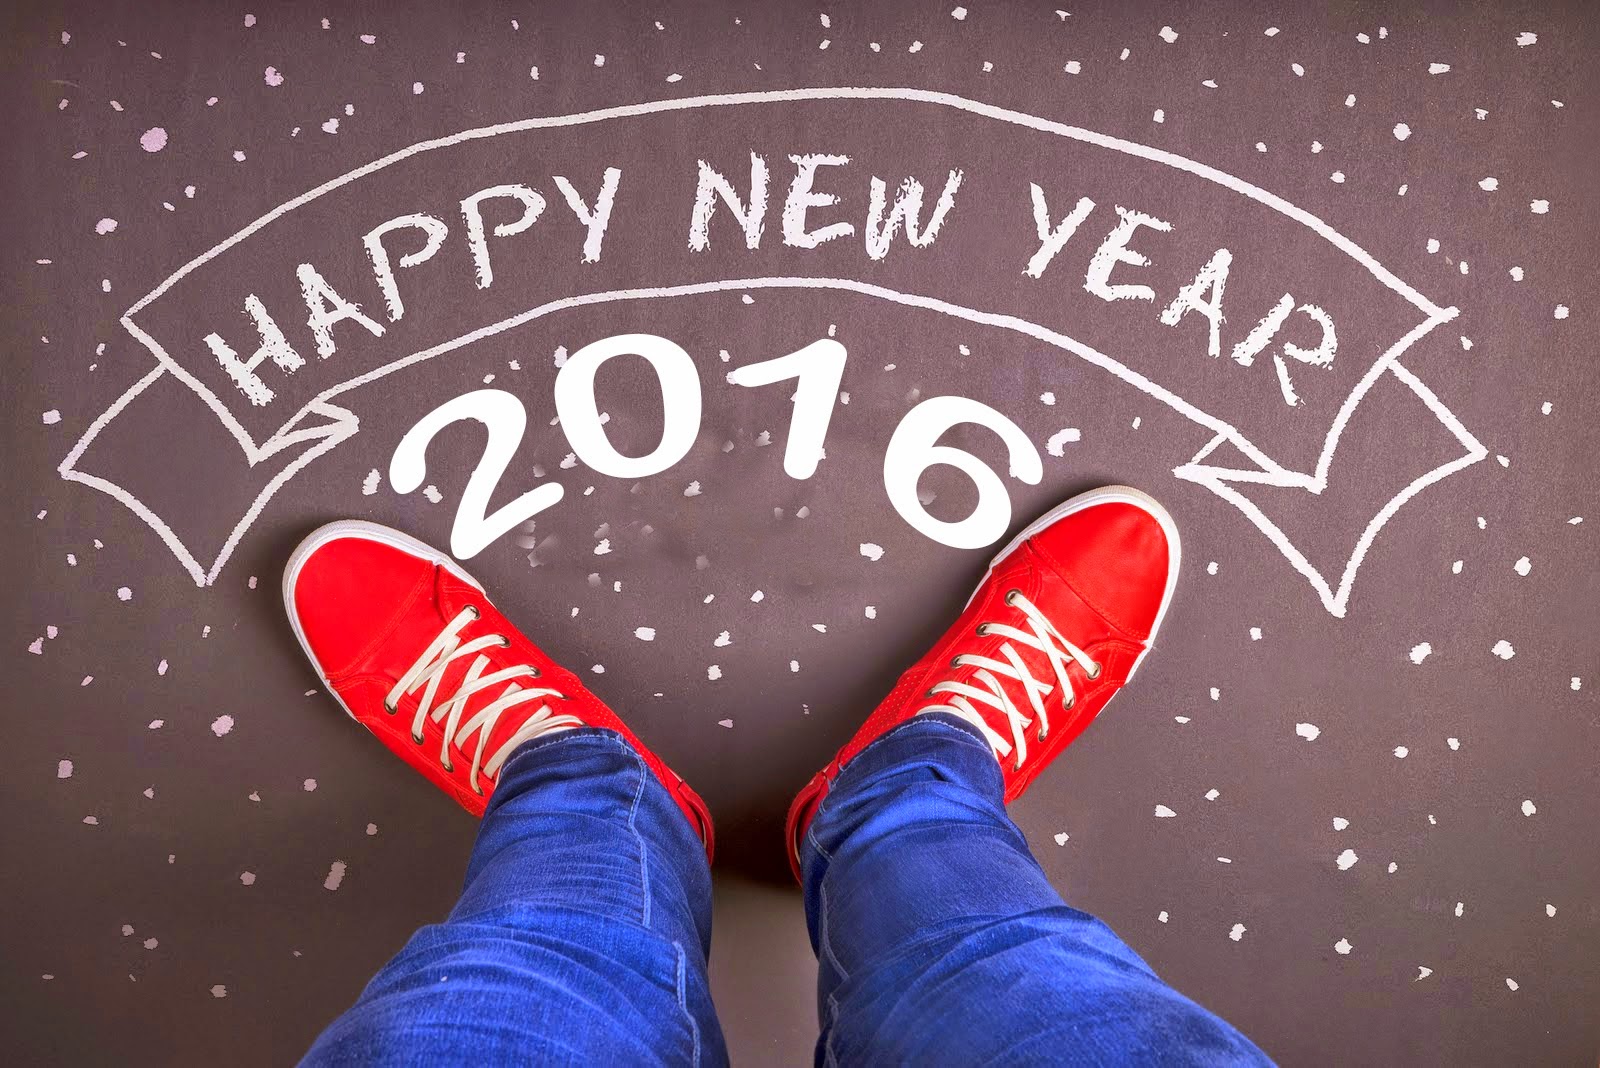 Happy new year 2016 3d images and wallpapers Best Wallpaper